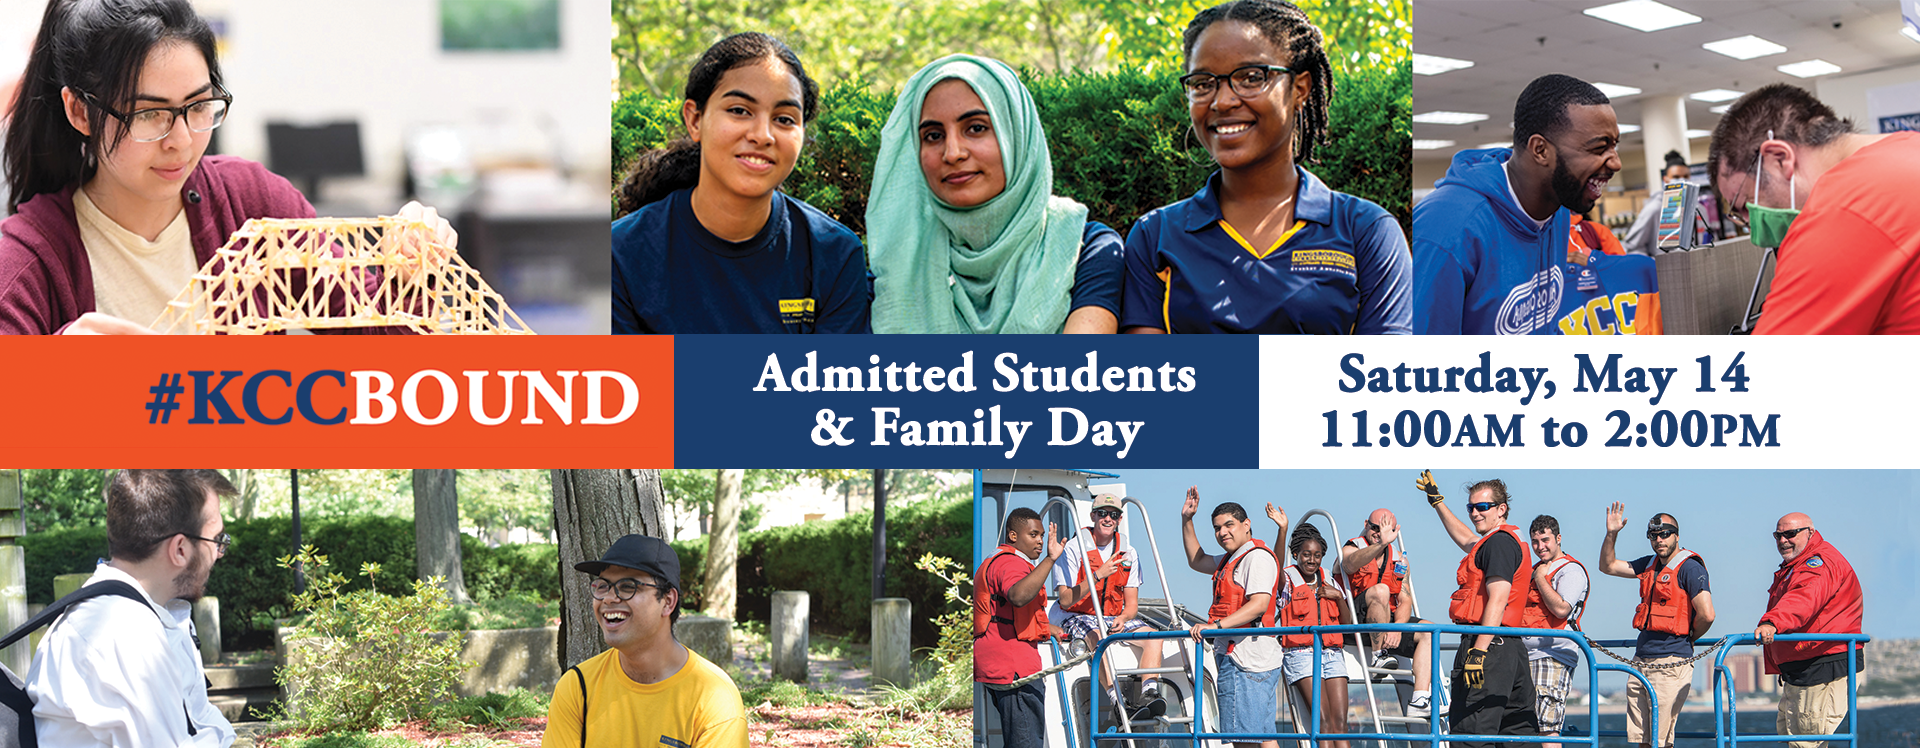 Admitted Students Family Day